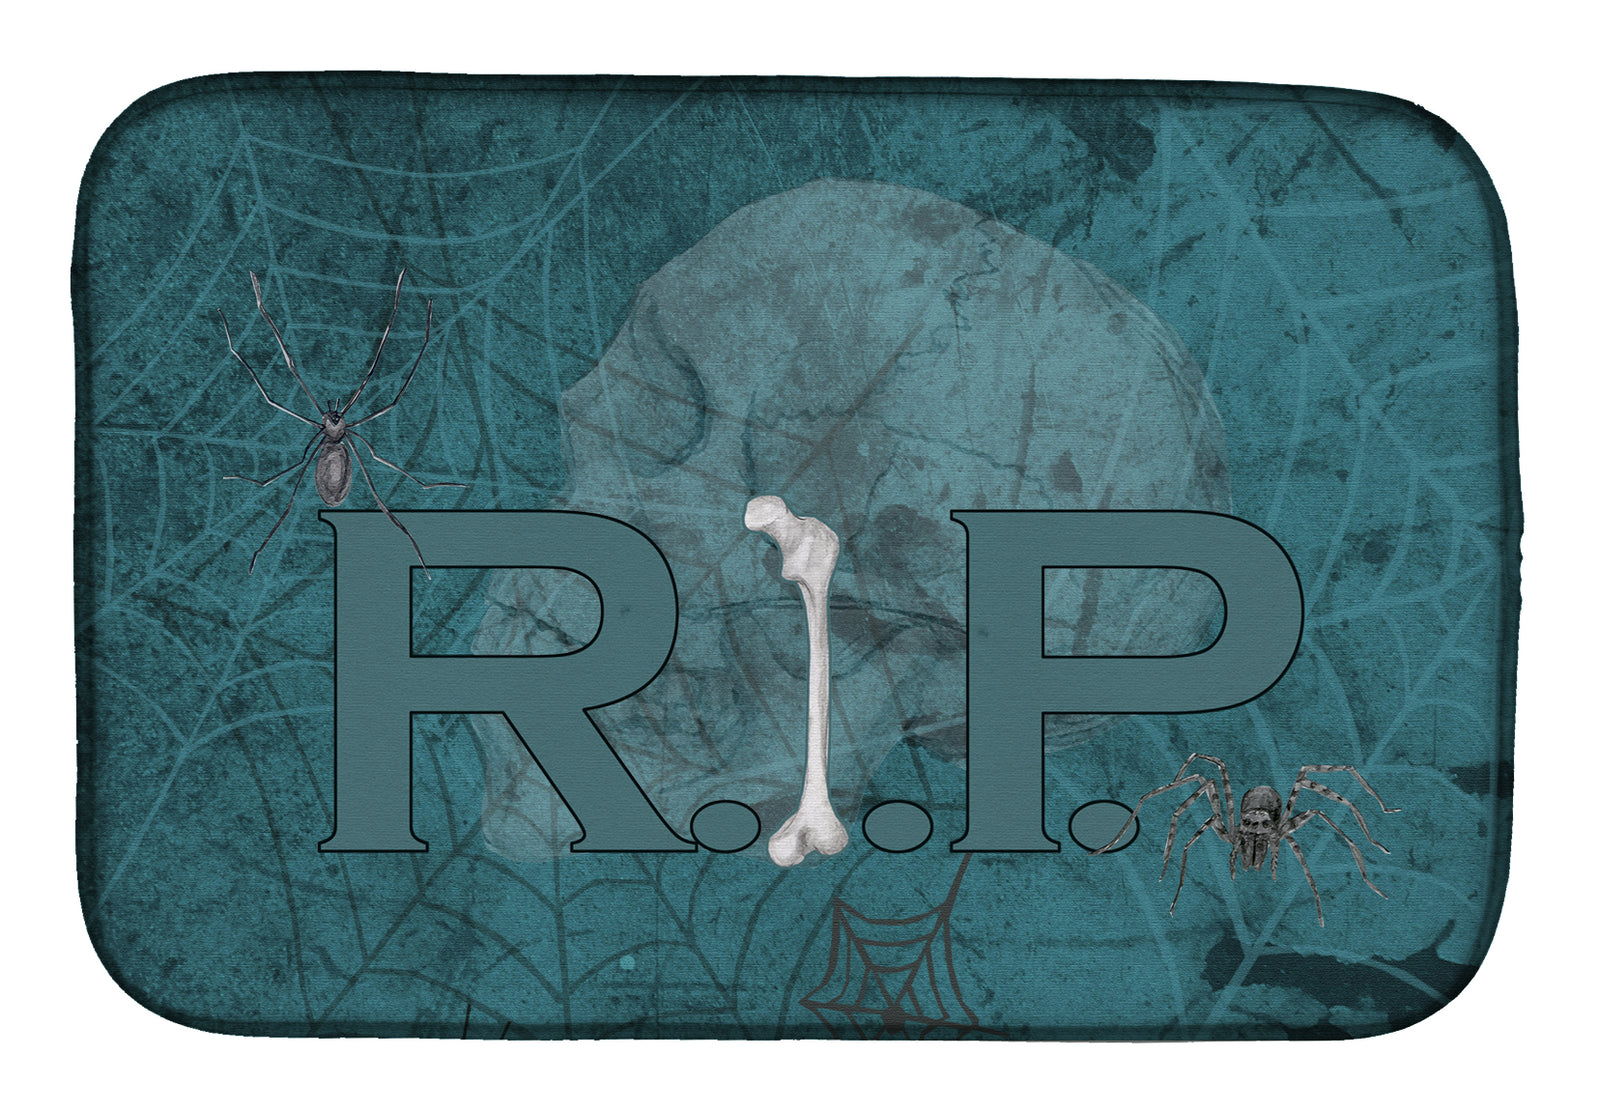 RIP Rest in Peace with spider web Halloween Dish Drying Mat SB3004DDM